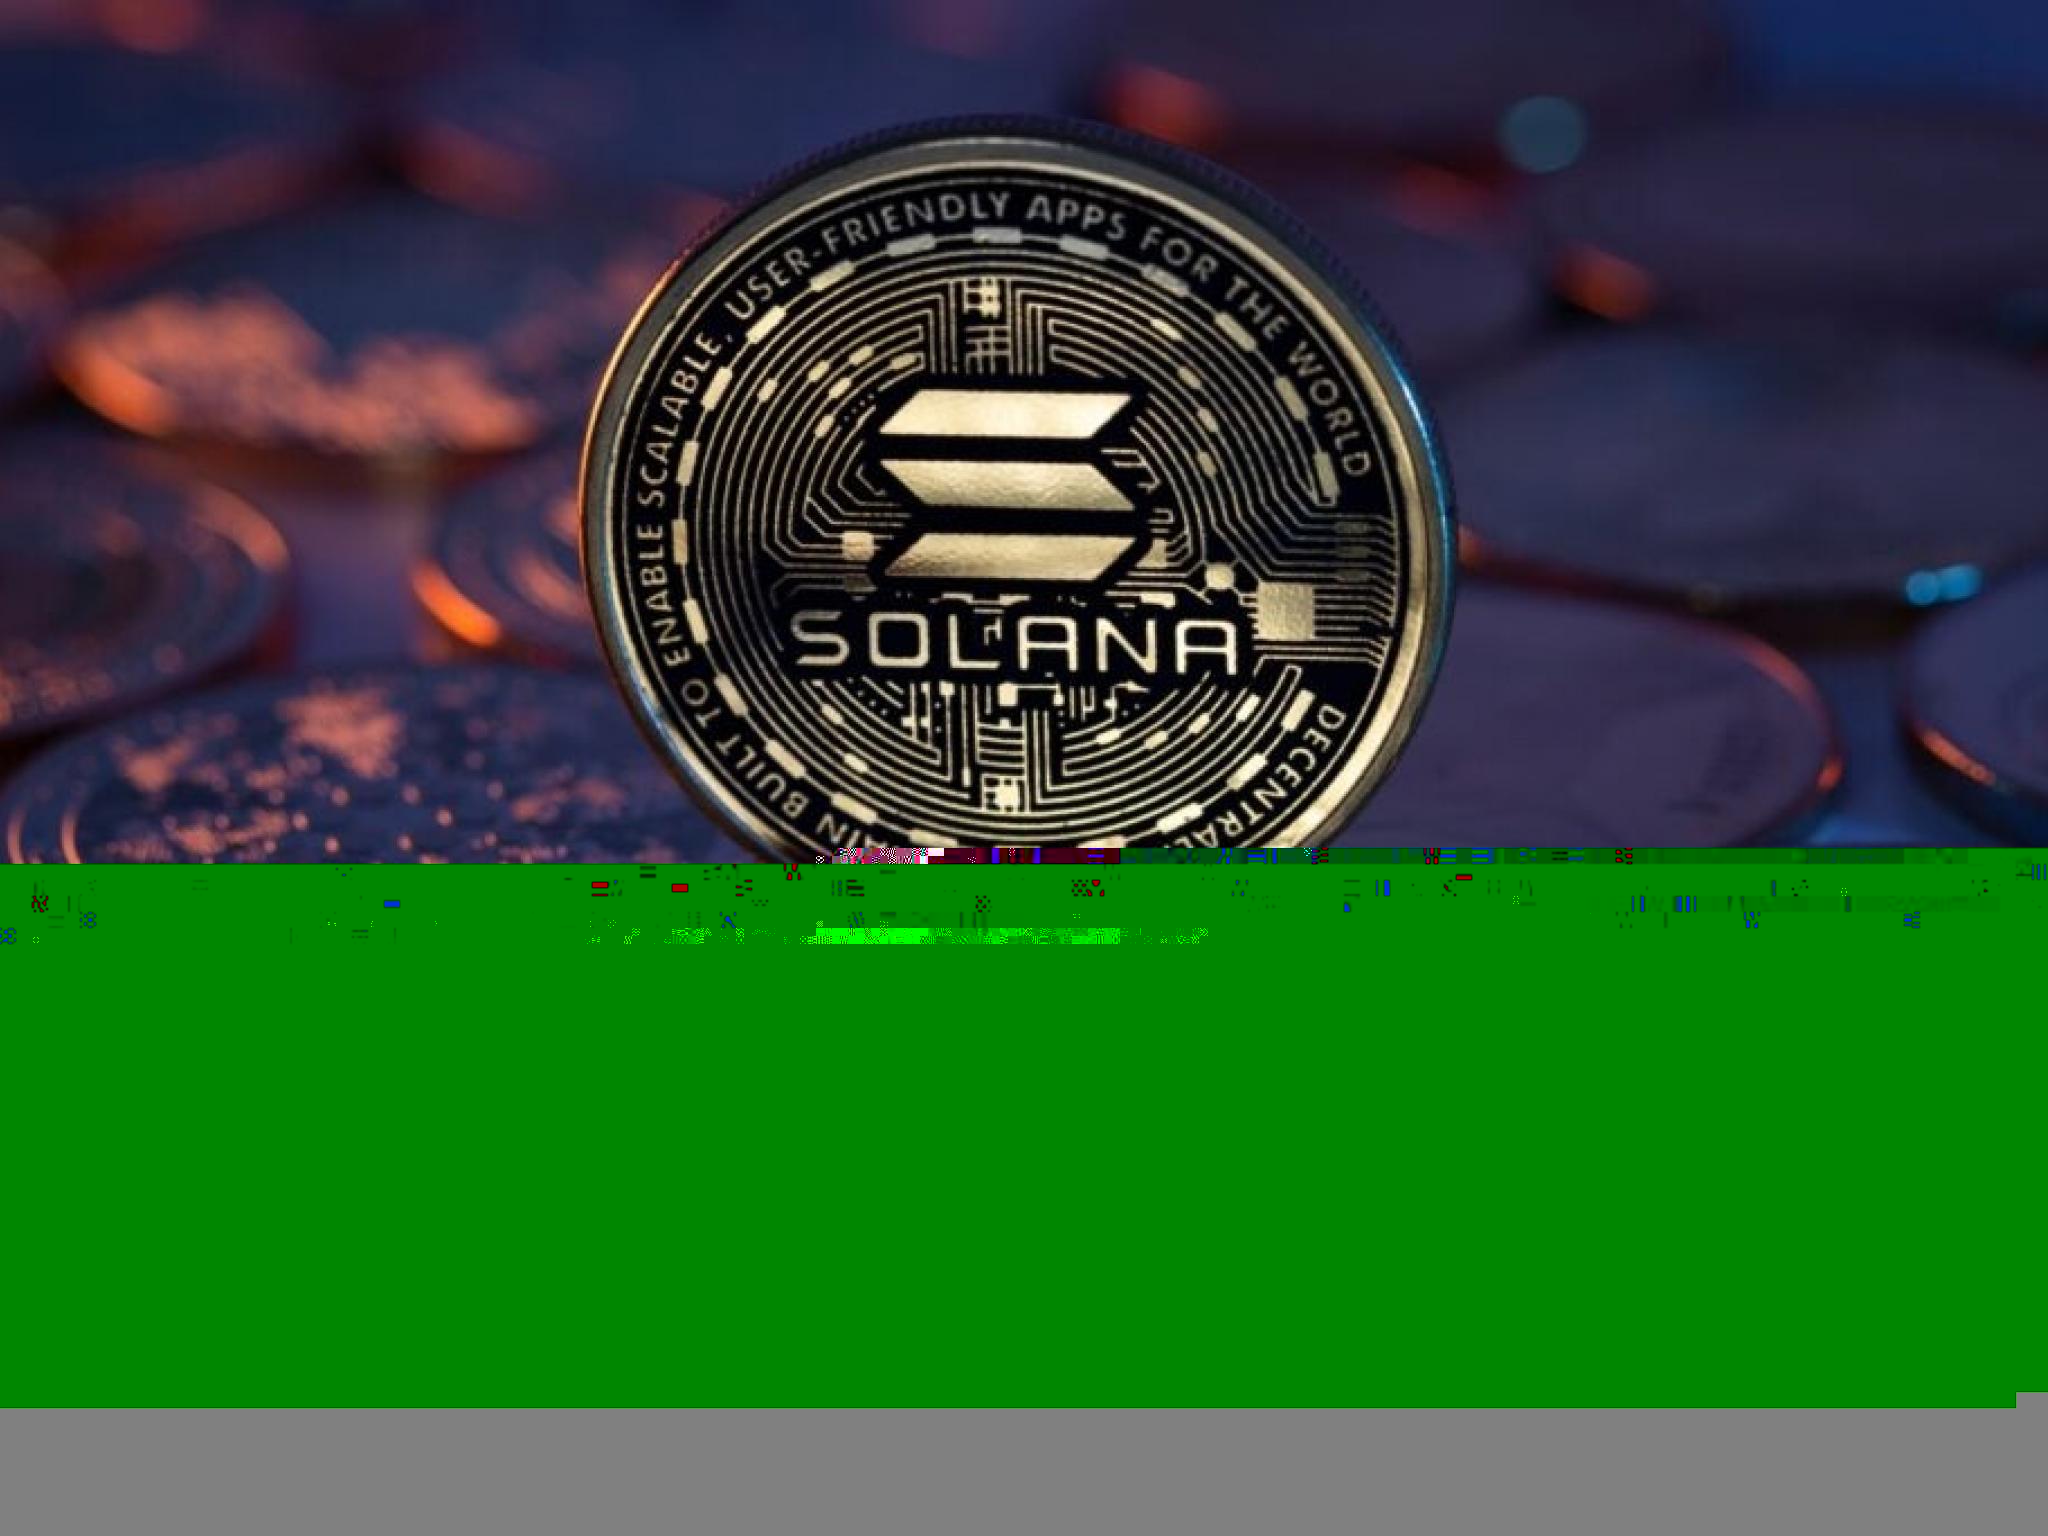  solana-up-7-and-could-get-to-50-of-ethereums-valuation-as-most-liquid-election-proxy-in-crypto-trader-says 